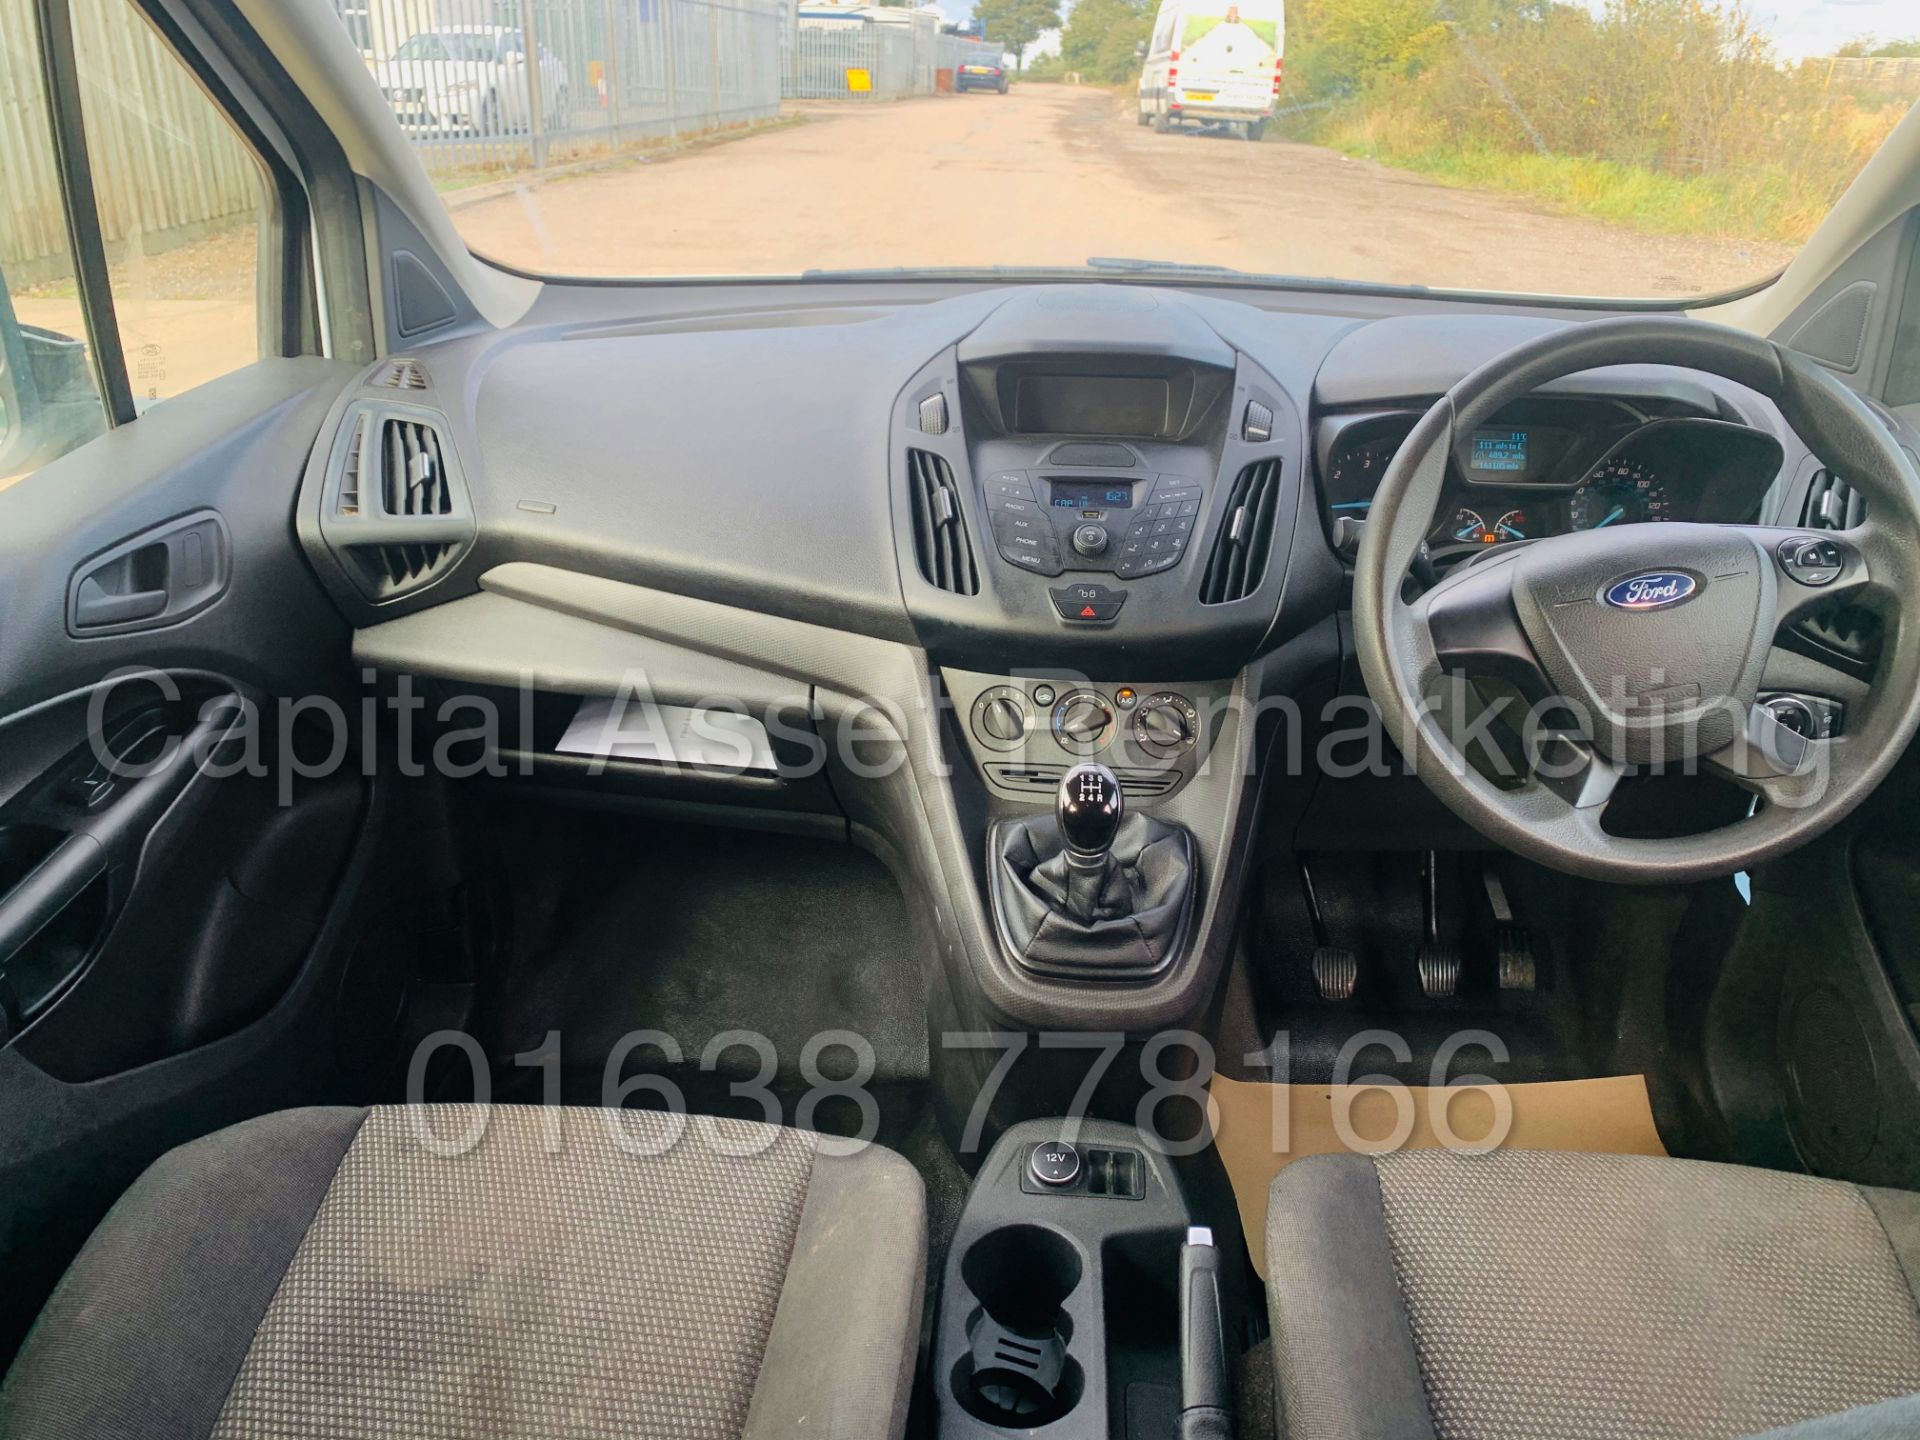 (ON SALE) FORD TRANSIT CONNECT *LWB - 5 SEATER CREW VAN* (2018 - EURO 6) 1.5 TDCI *A/C* (1 OWNER) - Image 26 of 40